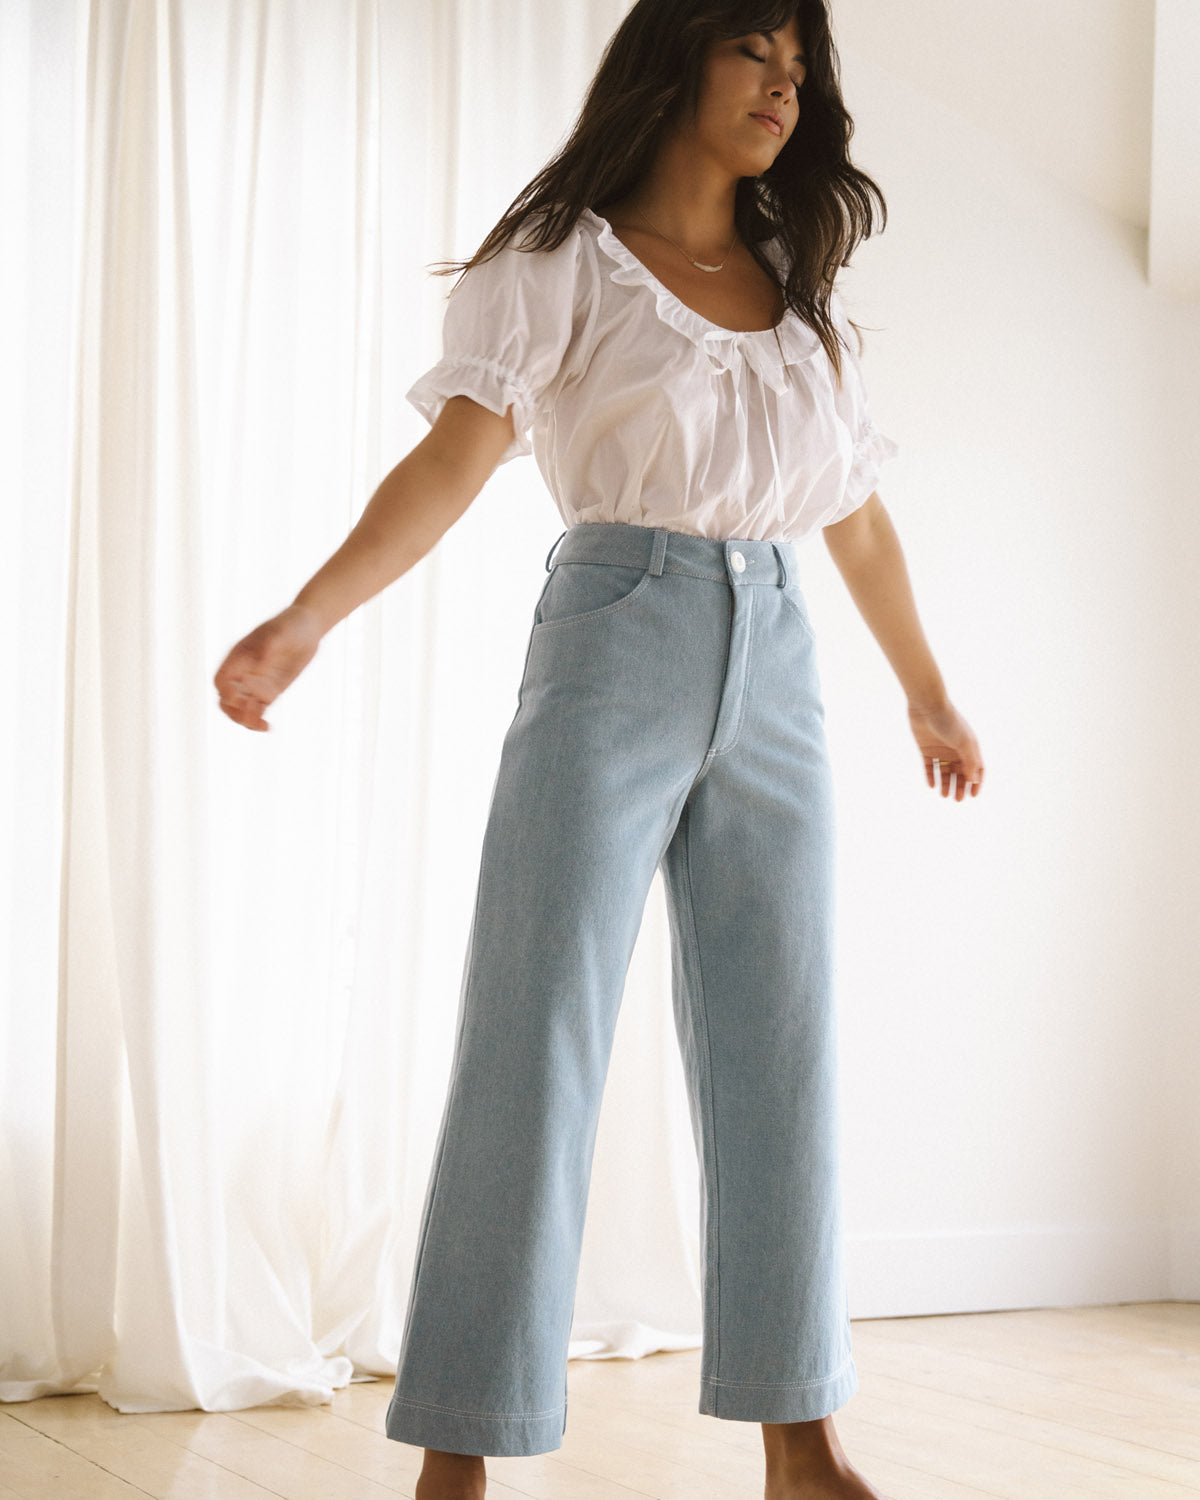 light denim wide-leg crop pants with belt loops and front pockets